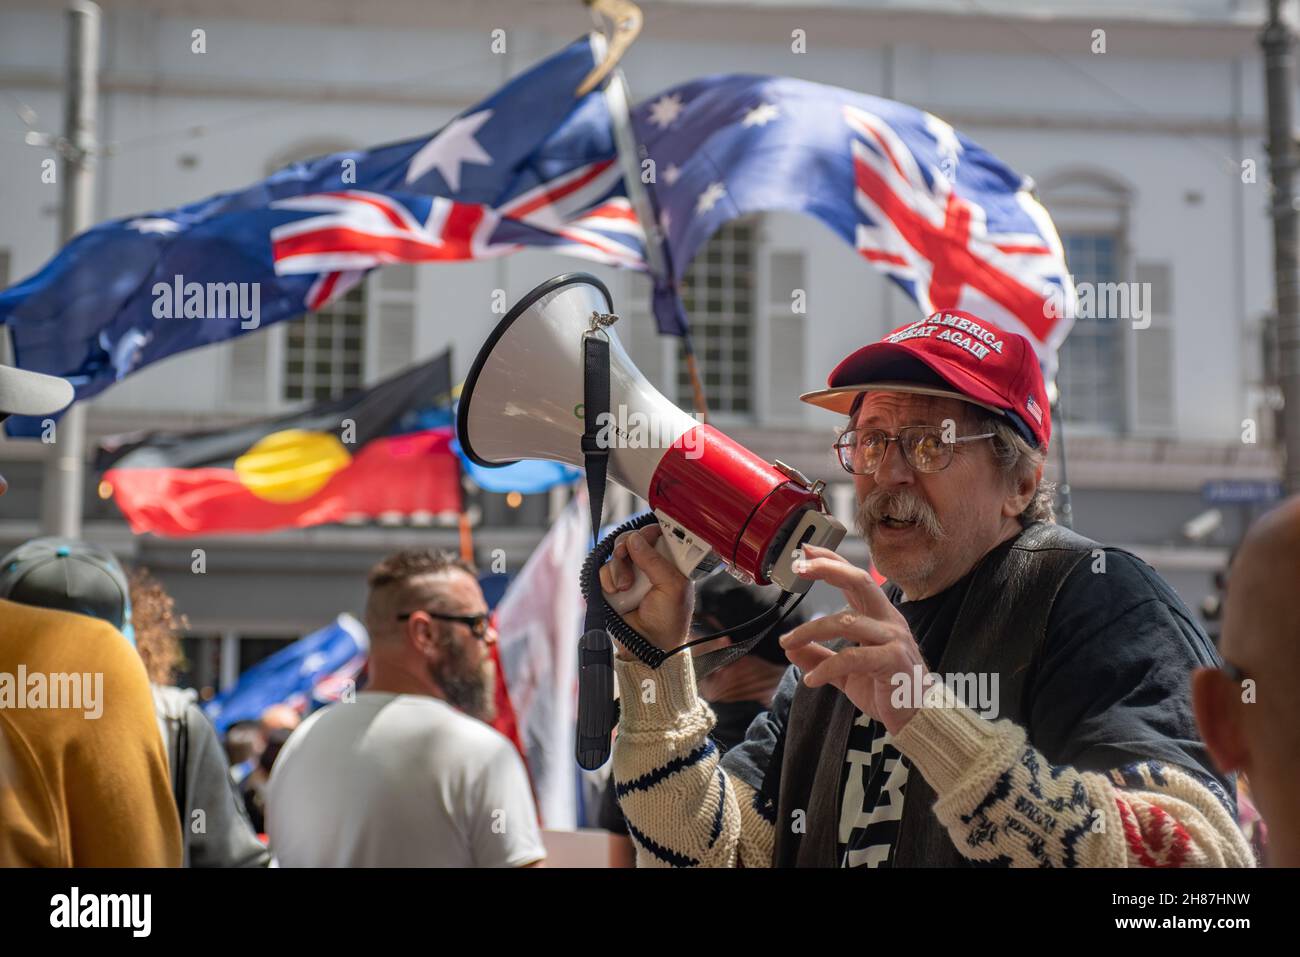 27th November 2021. Australian and Indigenous flags fly while a man with a MAGA hat speaks into a megaphone. Credit: Jay Kogler/Alamy Live News Stock Photo